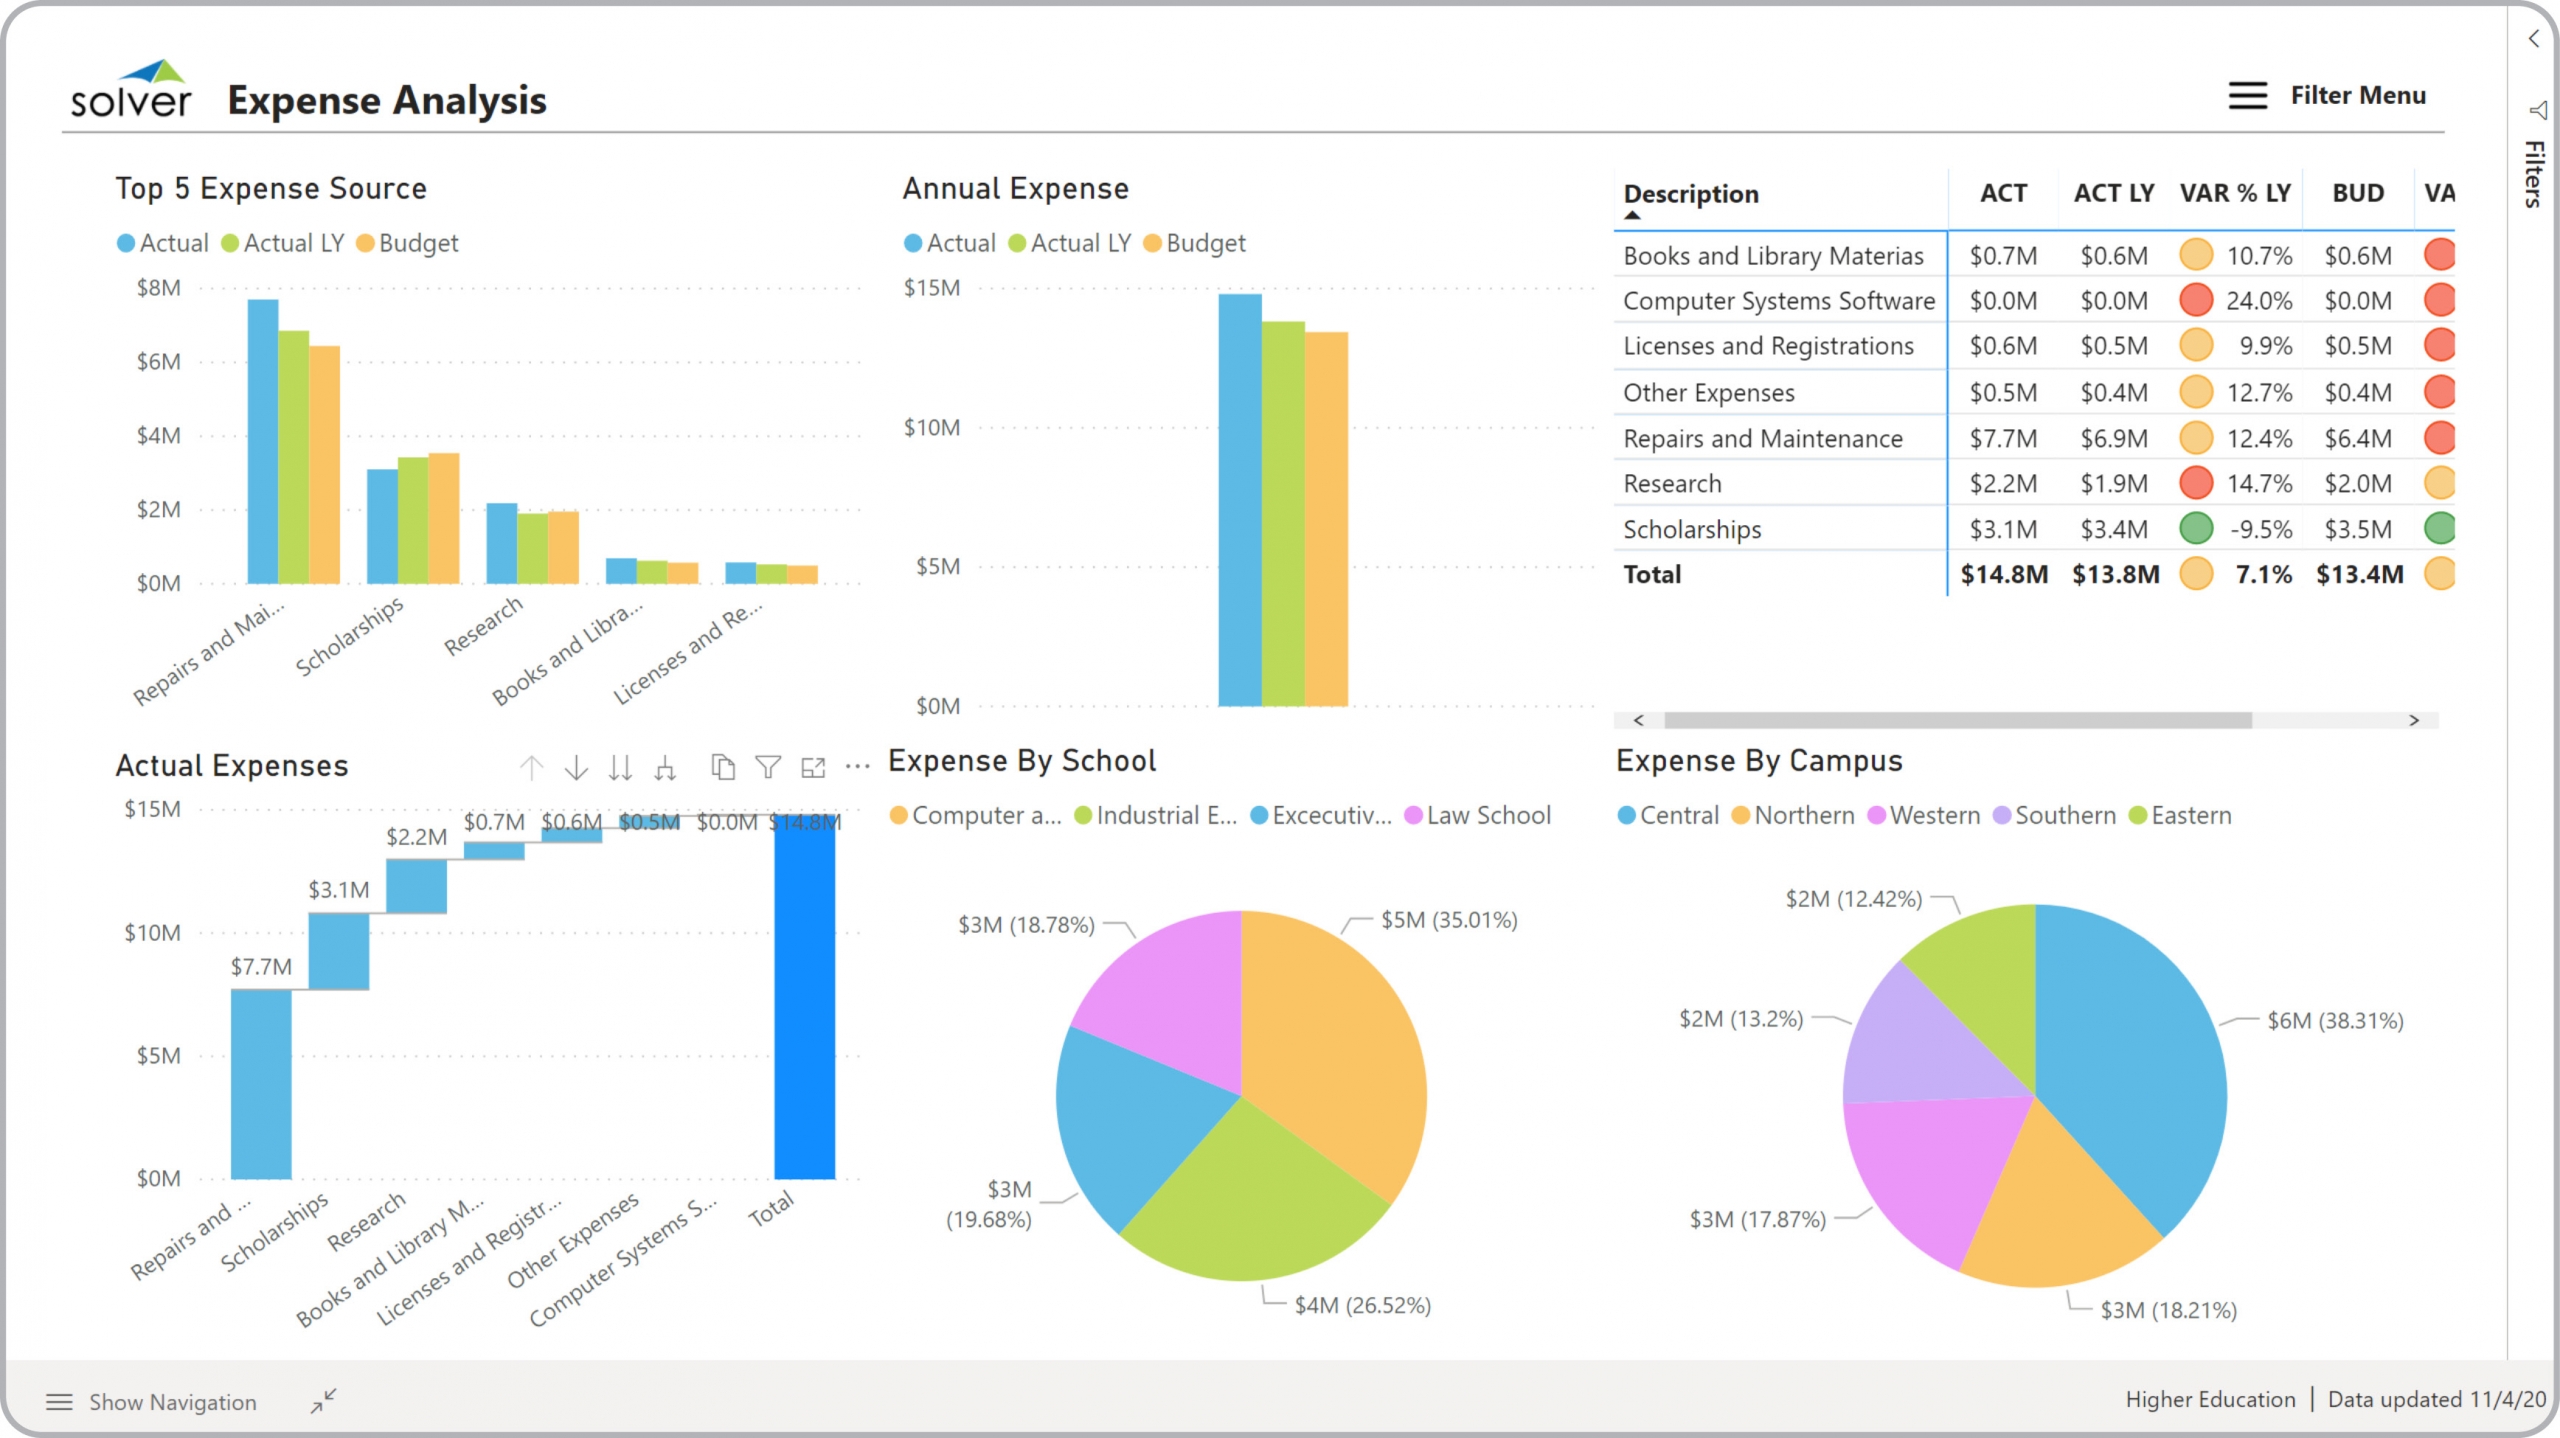 Example of a Expense Analysis Dashboard for Higher Education Institutions  